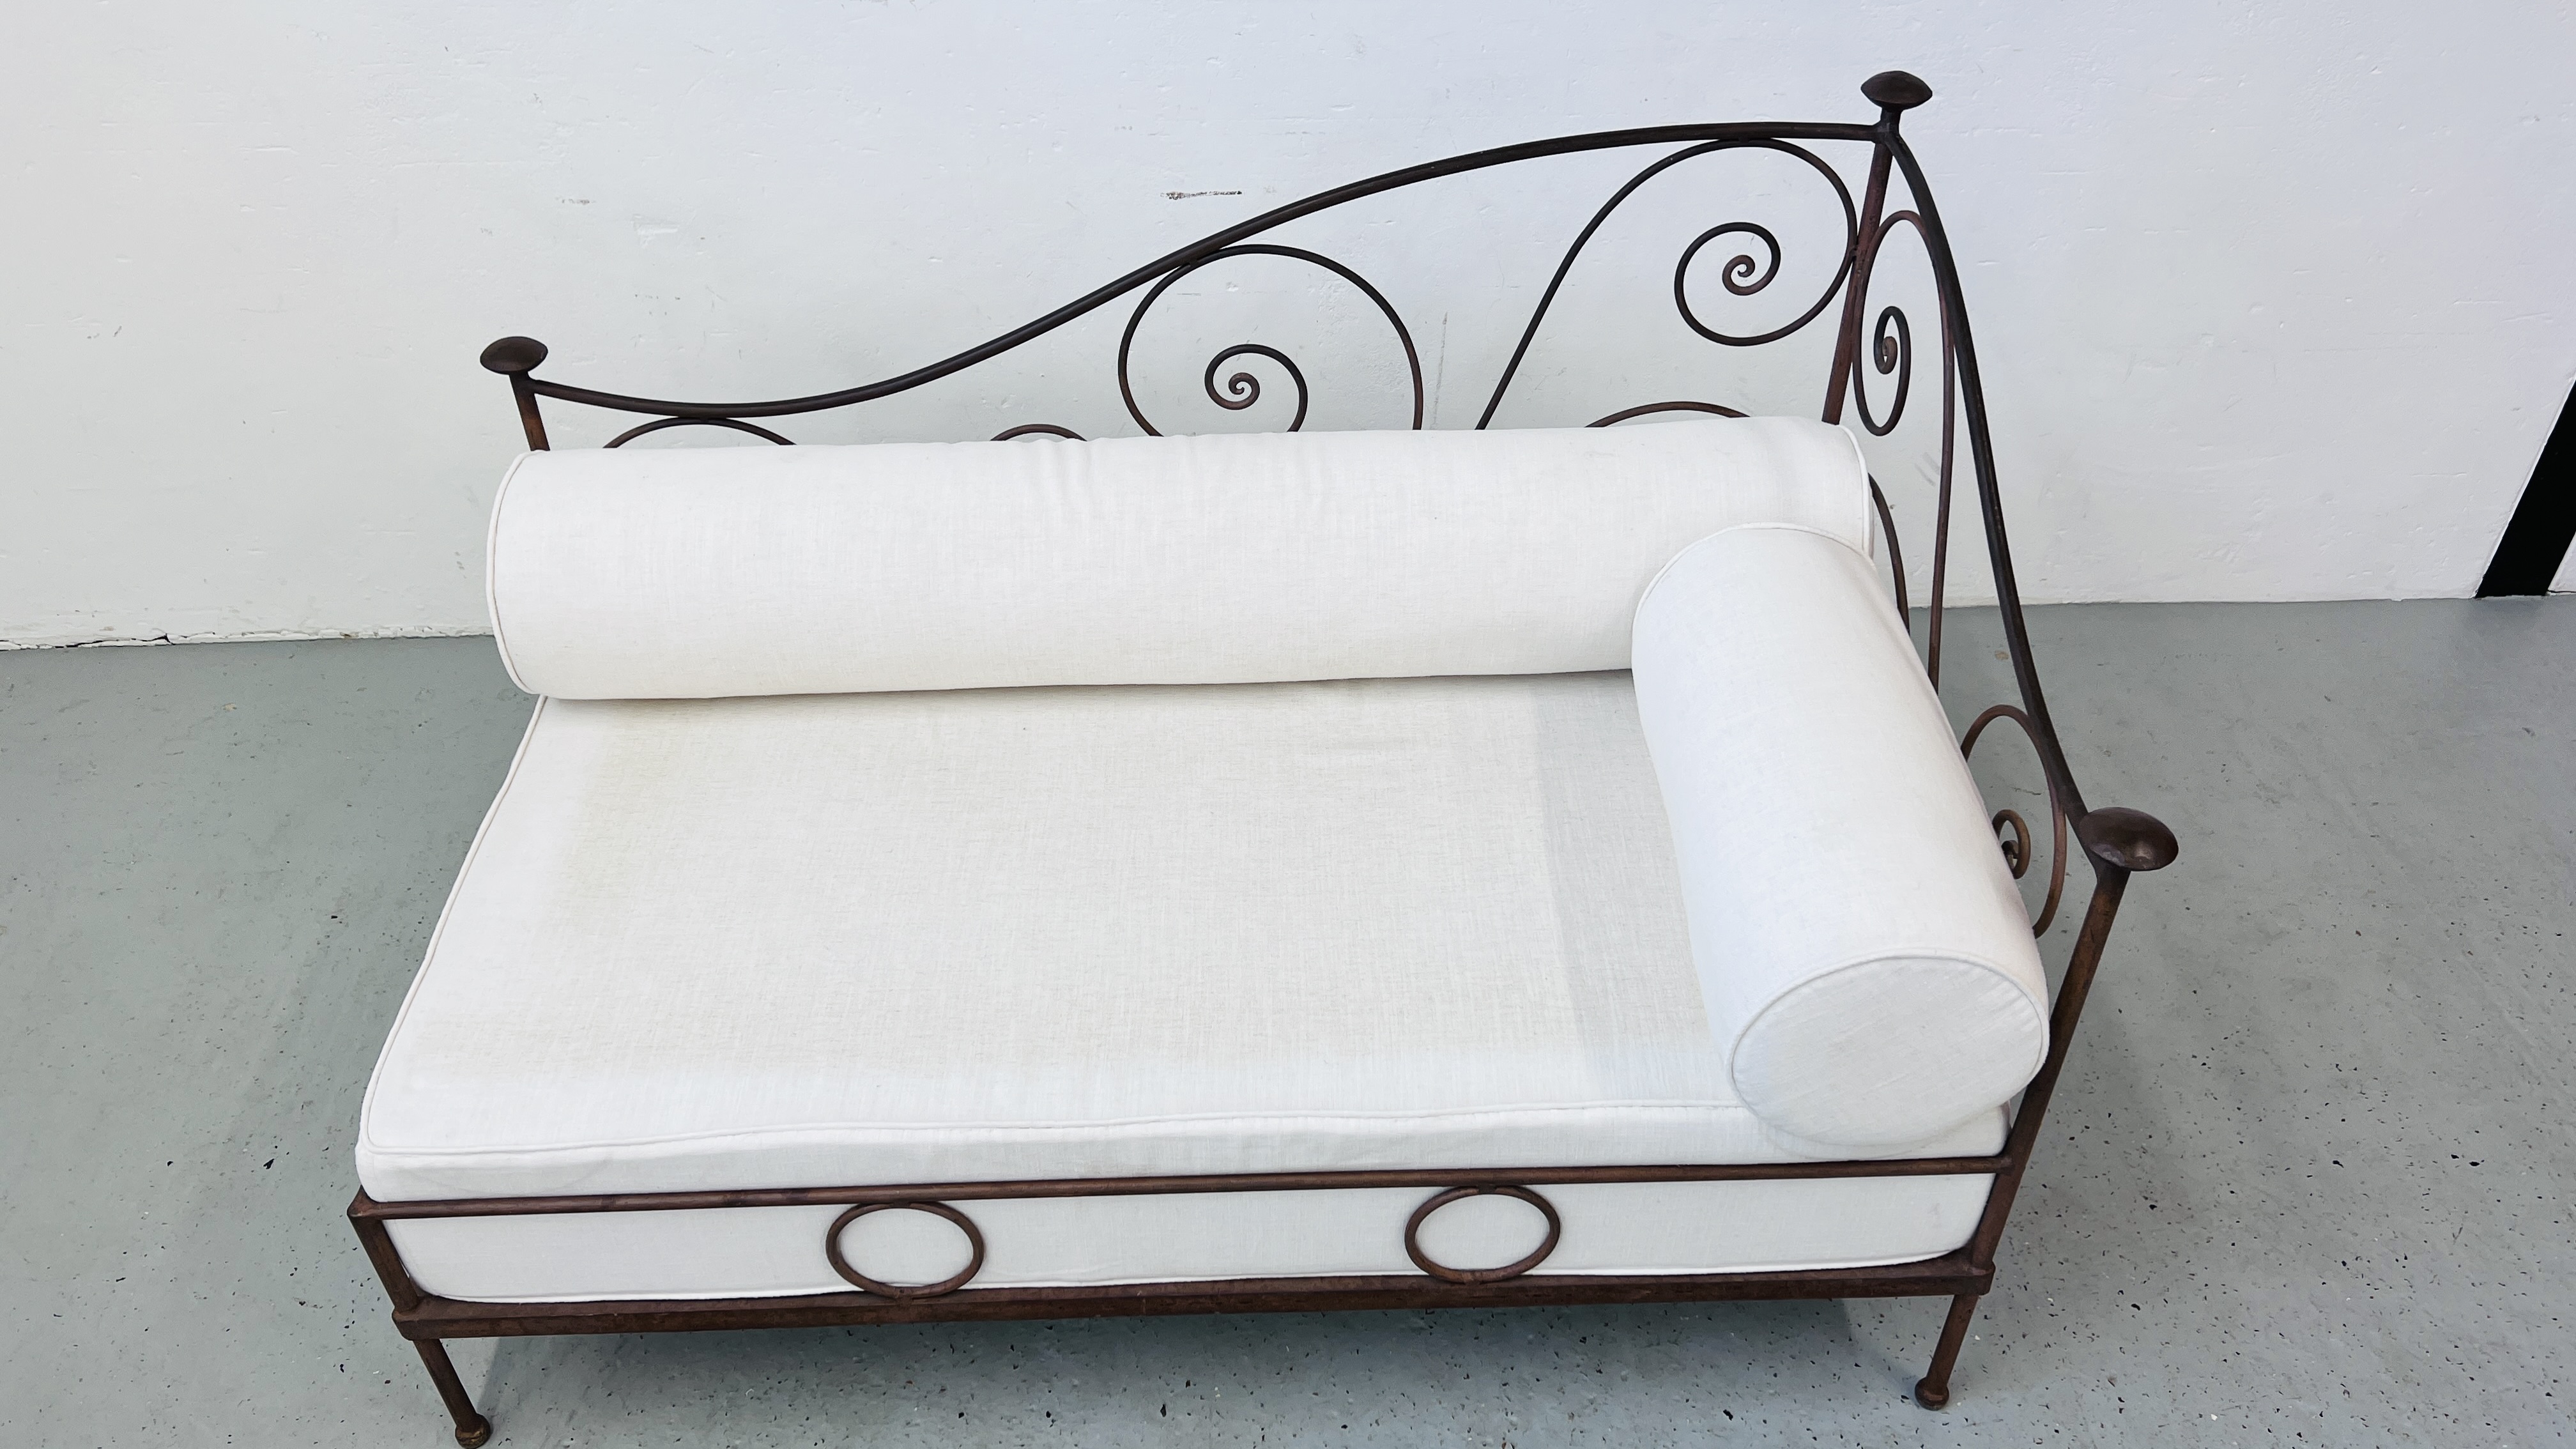 A FRENCH STYLE METALCRAFT CHAISE LOUNGE WITH CREAM UPHOLSTERED BASE AND BOLSTER CUSHIONS LENGTH - Image 13 of 13